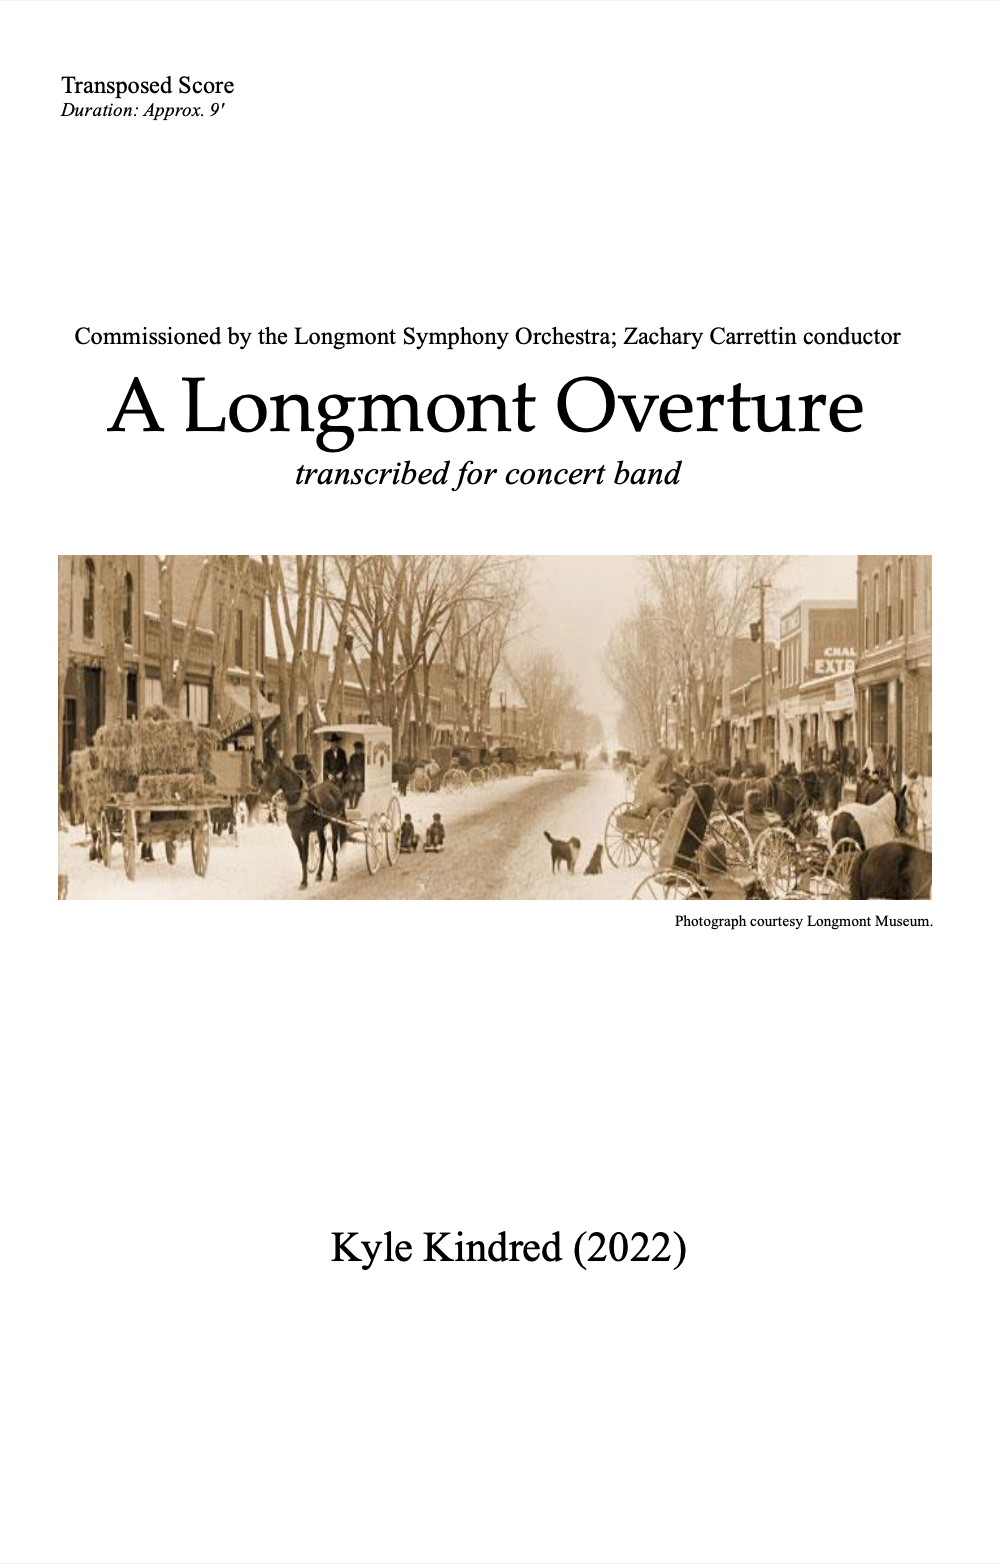 A Longmont Overture (Score Only) by Kyle Kindred